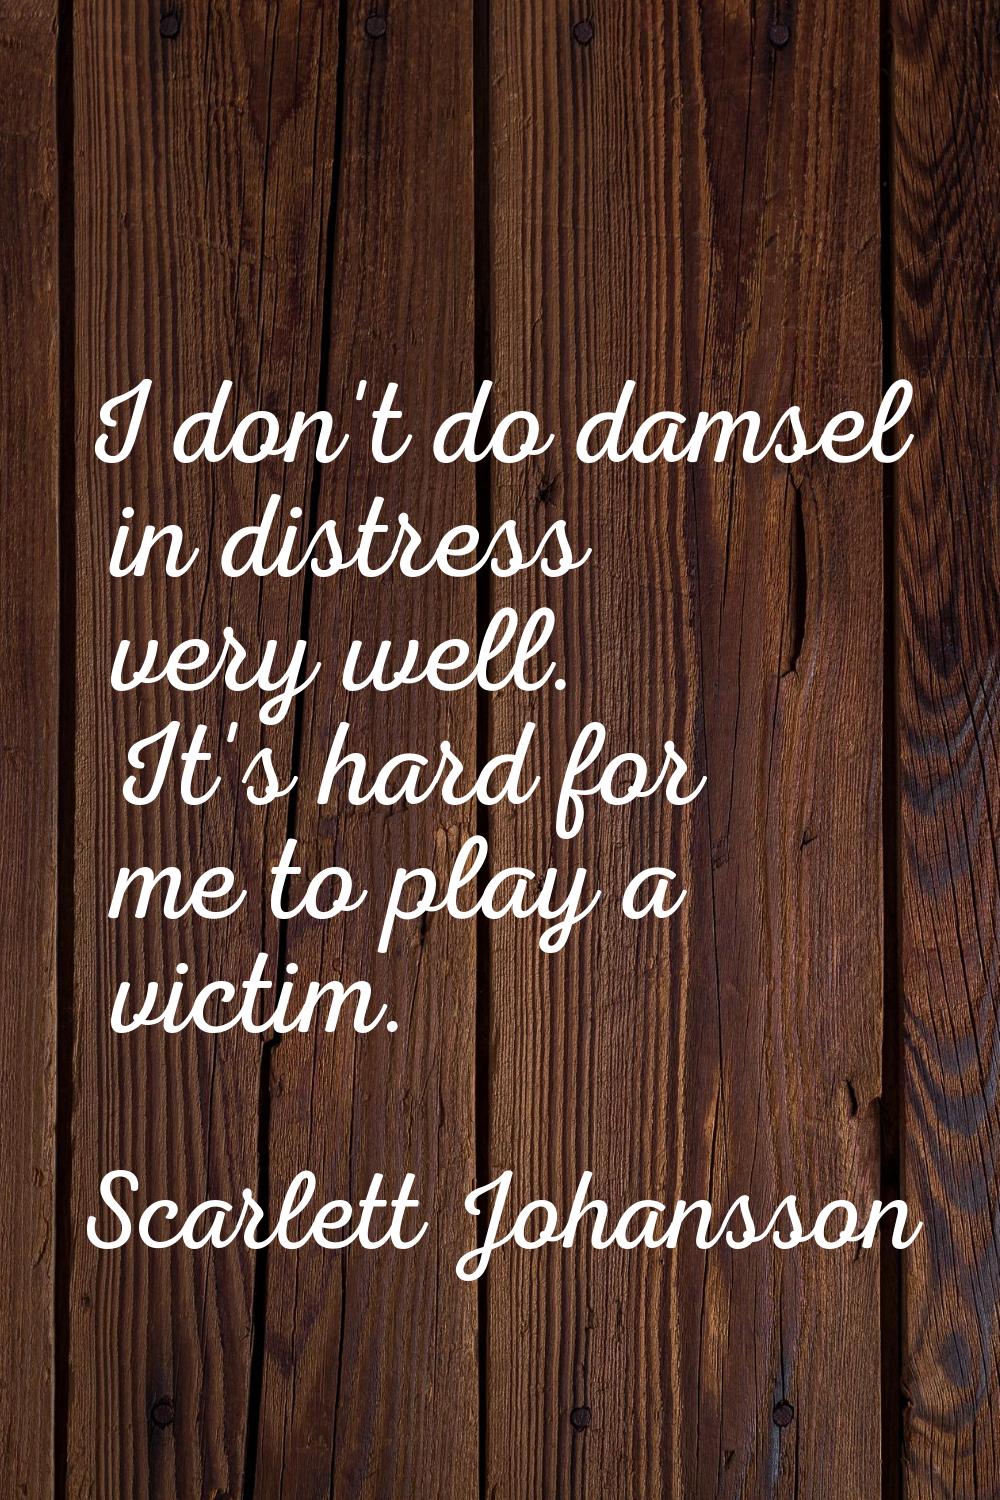 I don't do damsel in distress very well. It's hard for me to play a victim.